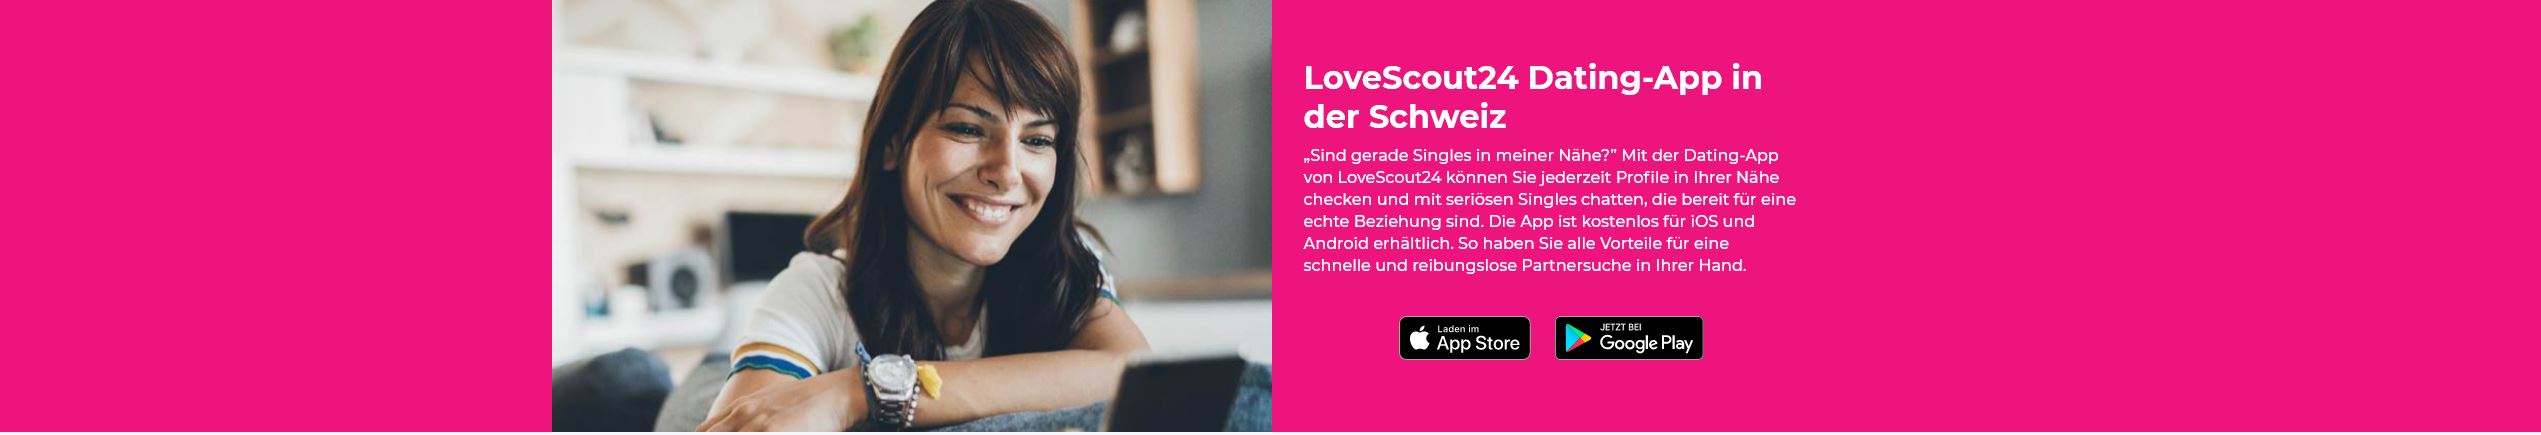 lovescout dating app